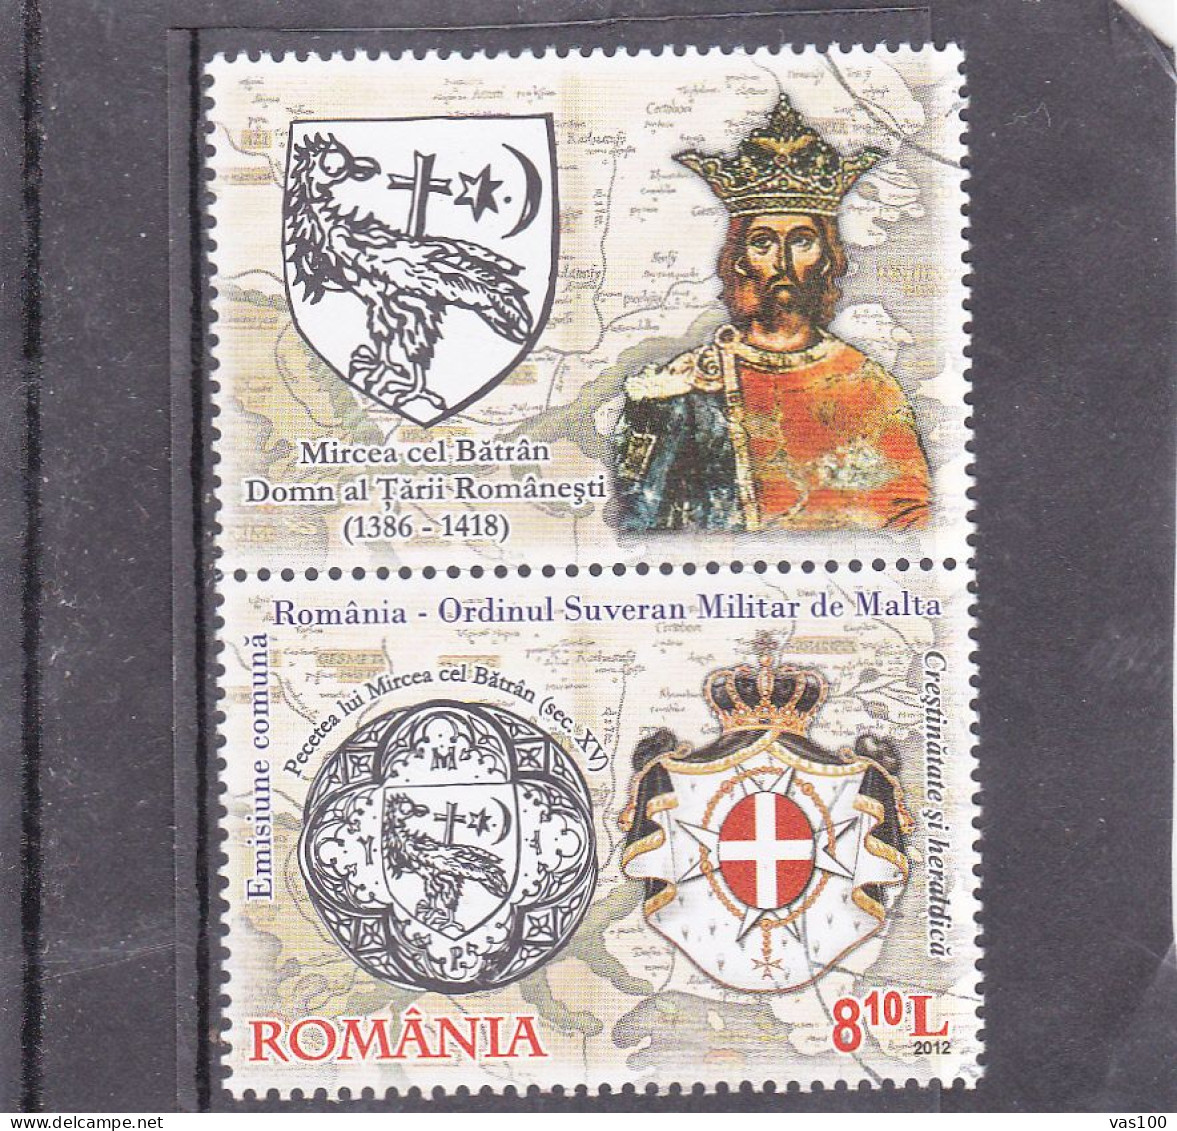 ROMANIA 2012 Relations With Sovereign Maltese Order USED + LABELS. Michel 6667 - Gebruikt